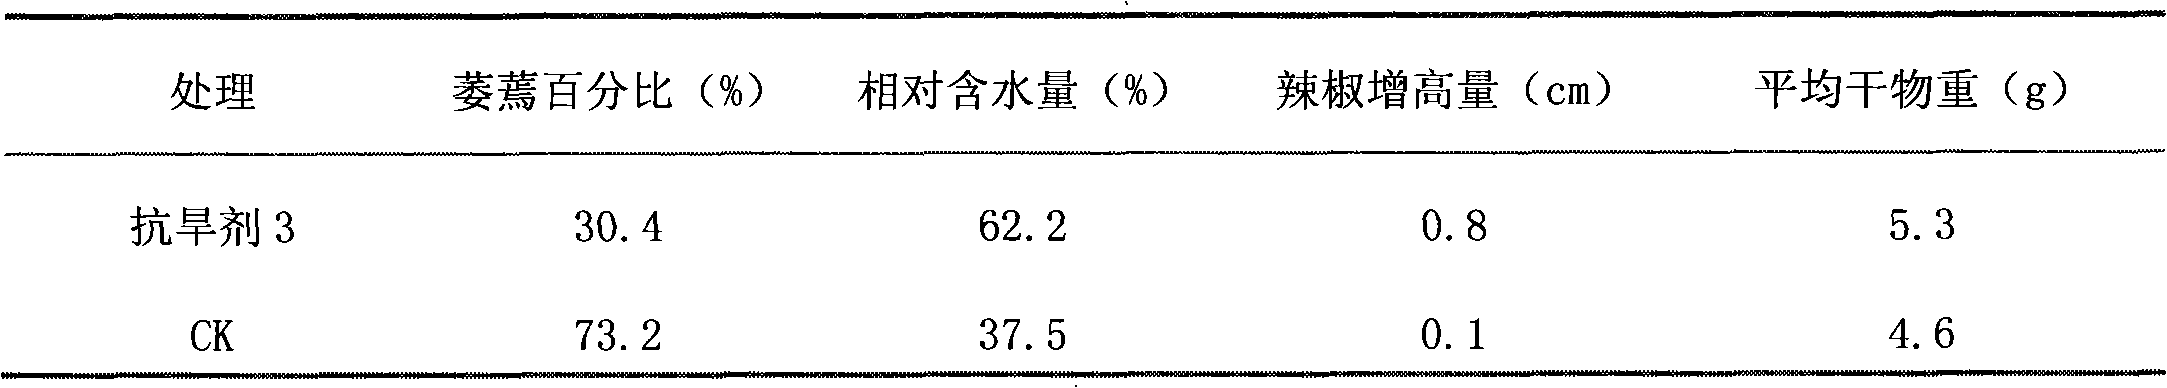 Chitosan oligosaccharide composite with drought resisting function and application of composite